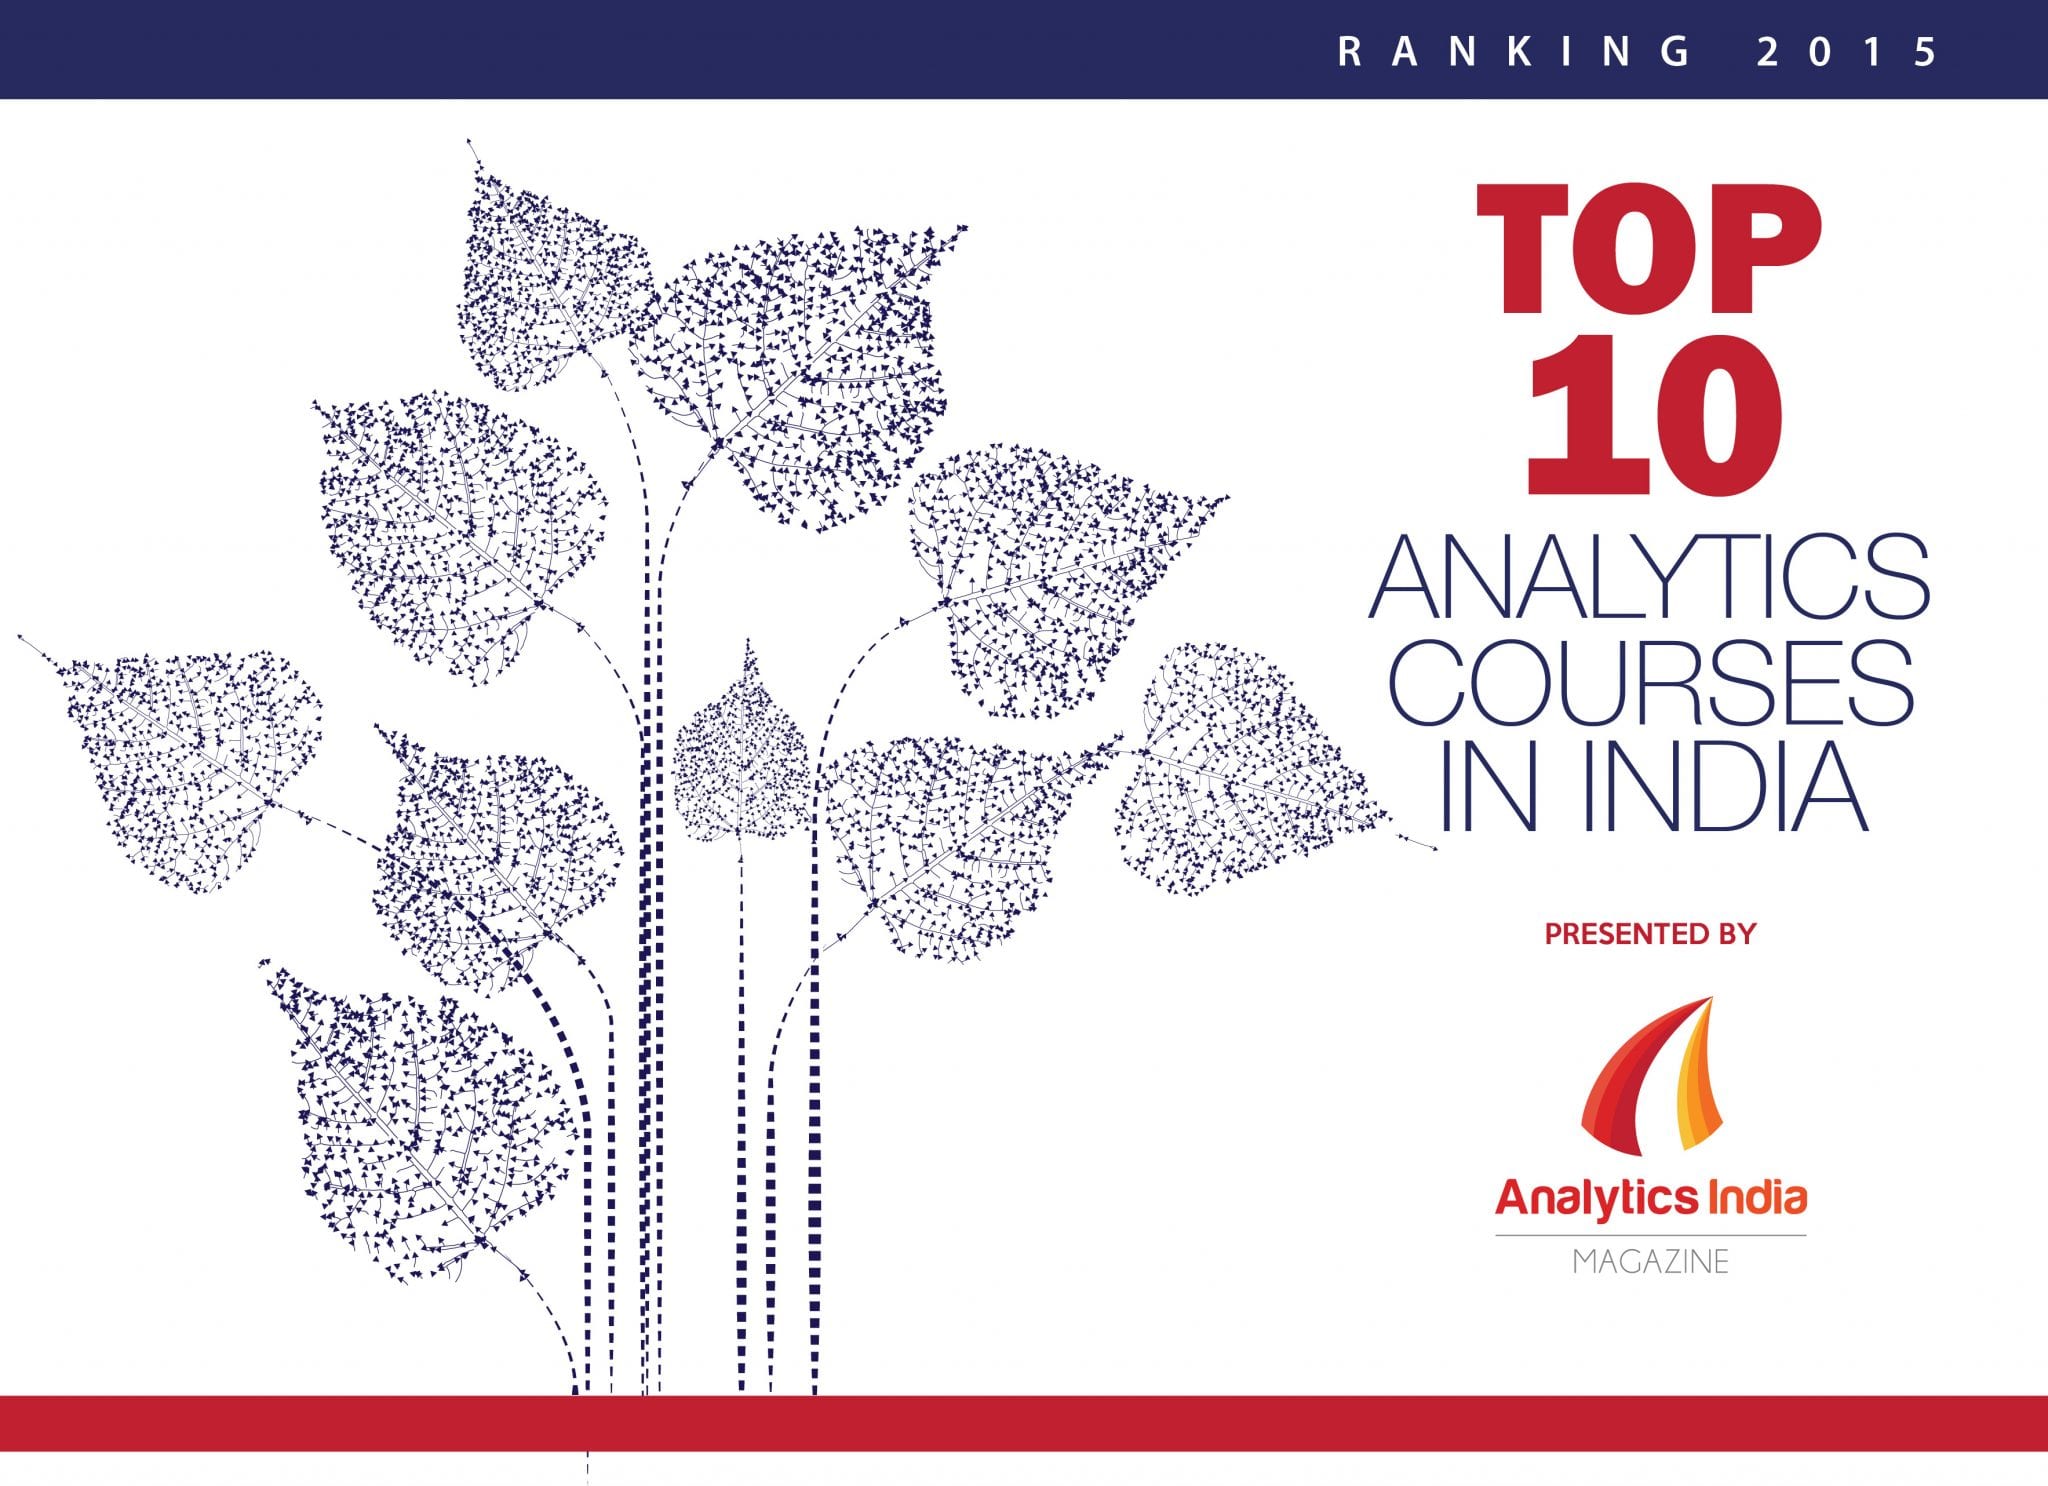 Top 10 Business Analytics Courses in India - Ranking 2015